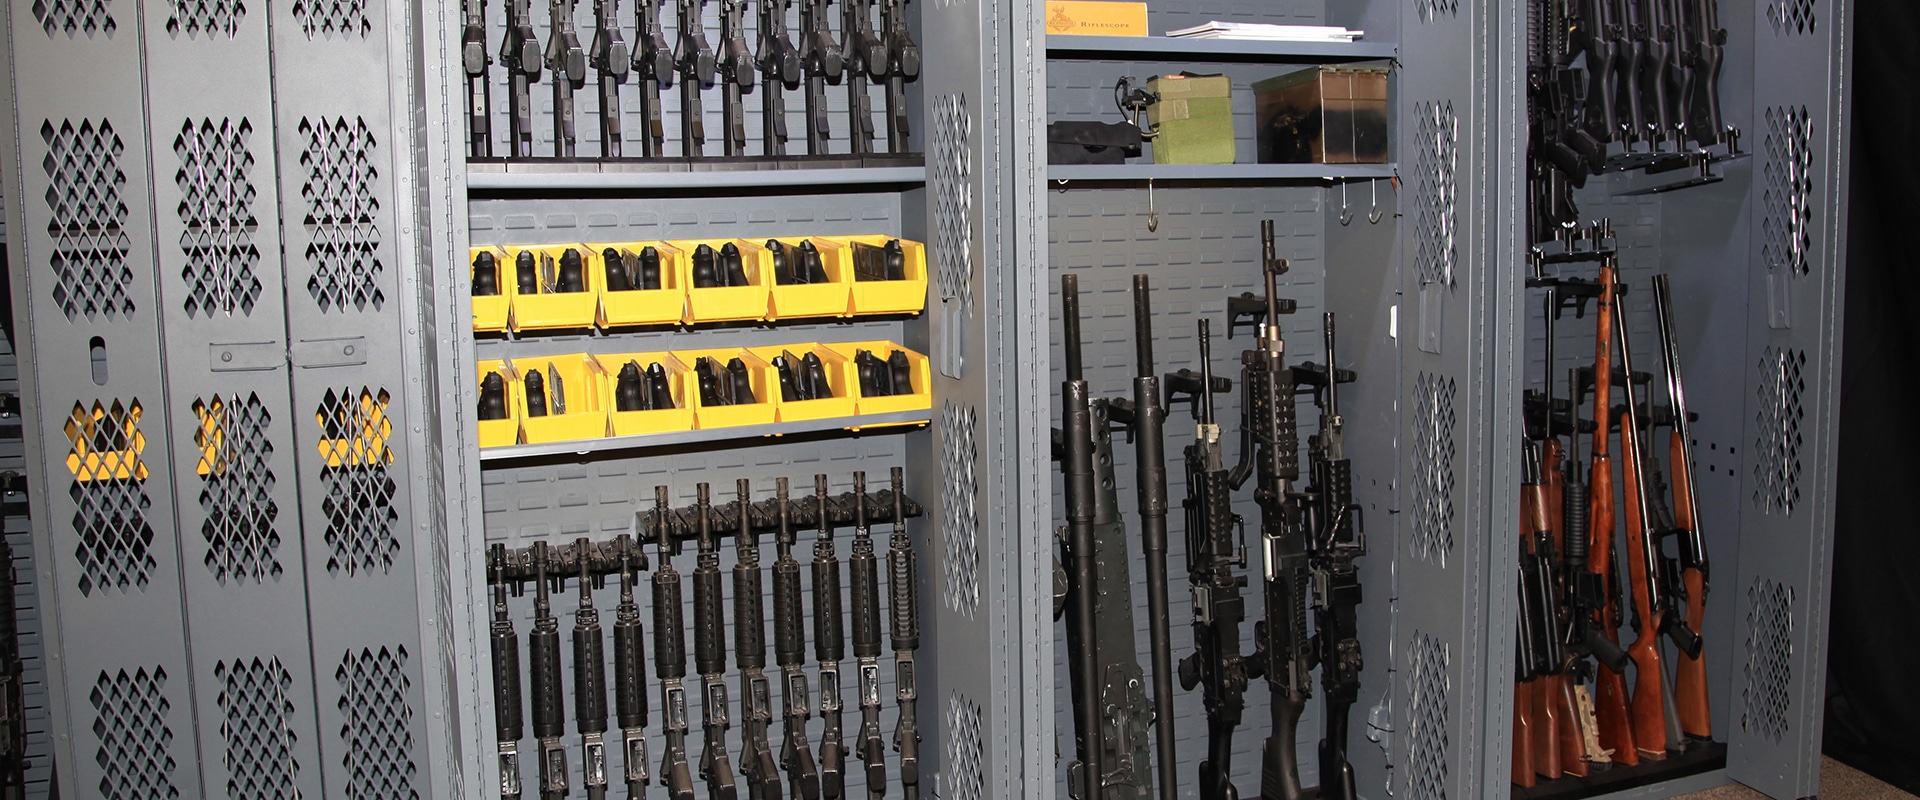 How To Build An Armory Weapon Storage SecureIt Tactical